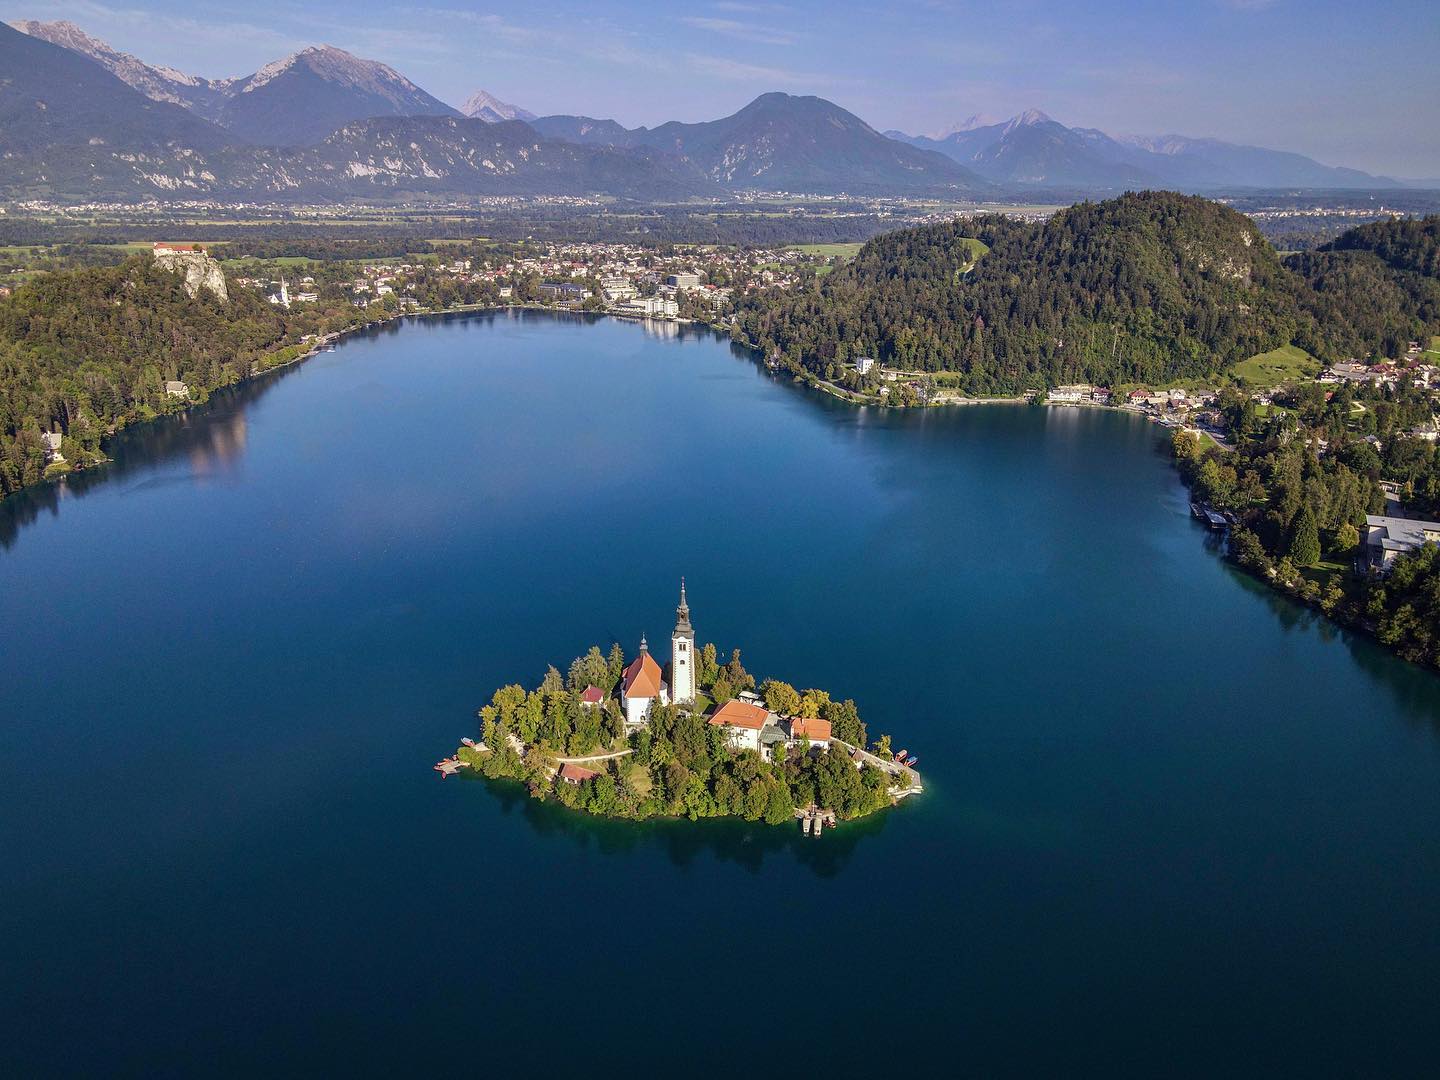 Lake Bled is one of the most picturesque spots to visit in Slovenia. This small lake has all of the ingredients for the perfect getaway…a castle perched high on a hillside, a pretty little island to visit, hiking trails, secluded swimming spots, and a fantastic sweet treat. 
.
.
.
#bled #lake #lakebled #slovenia #sloveniatravel #slovenia_ig #visitslovenia #slowenien #boat #bledslovenia #drone #droneshot #island #dronephotography #droneshots #dronestagram #droneoftheday #mavicair2 #dji #djimavicair2 #dronefly #drohne #bledcastle  #drohnenfotografie #bledersee #bledlake #travel #sloveniadrone #bledisland #exploringslovenia @slovenia @feelslovenia @loveslovenia @slovenia_lovers @exploringslovenia @slovenians_travel @bestofslovensko @igslovenia @slovenia.insta @best.europe.photos @_igeuropa @besteurope @incredible_europe @europe_moments @europestyle_ @fstopgear @dronemperors